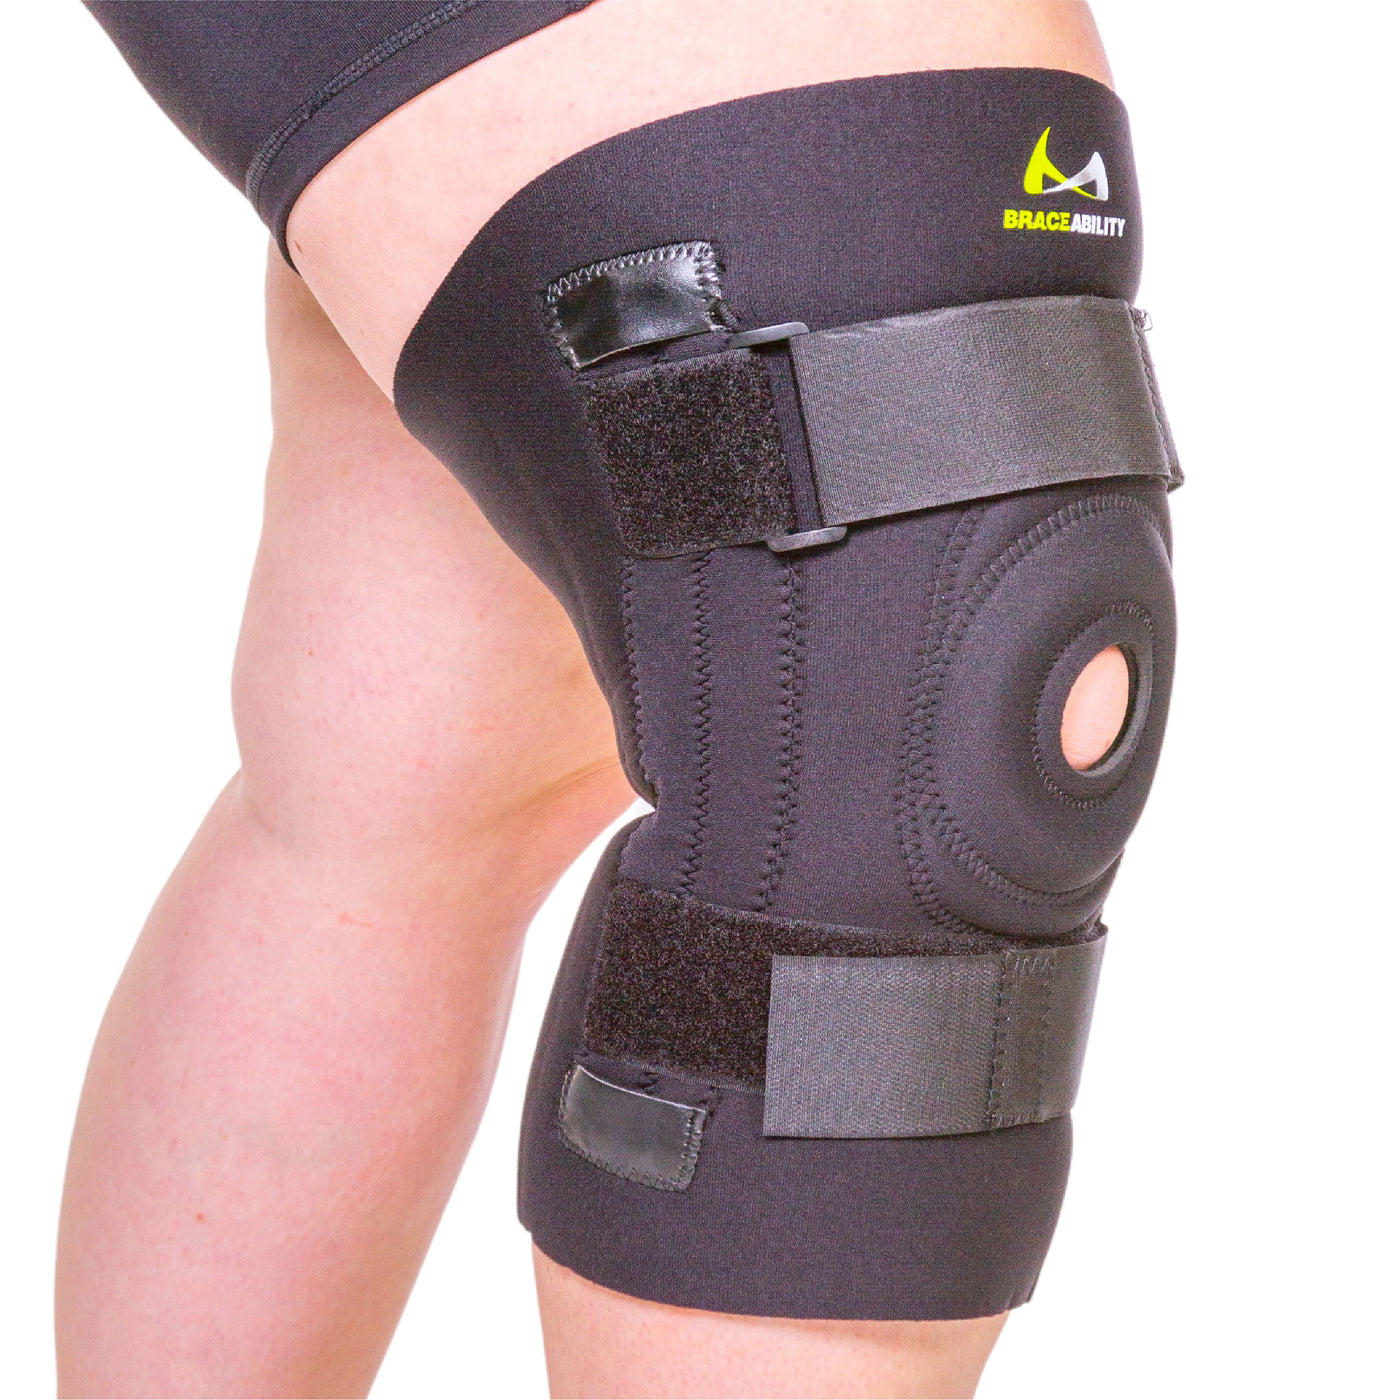 Big knee sleeve brace for large legs with patella support